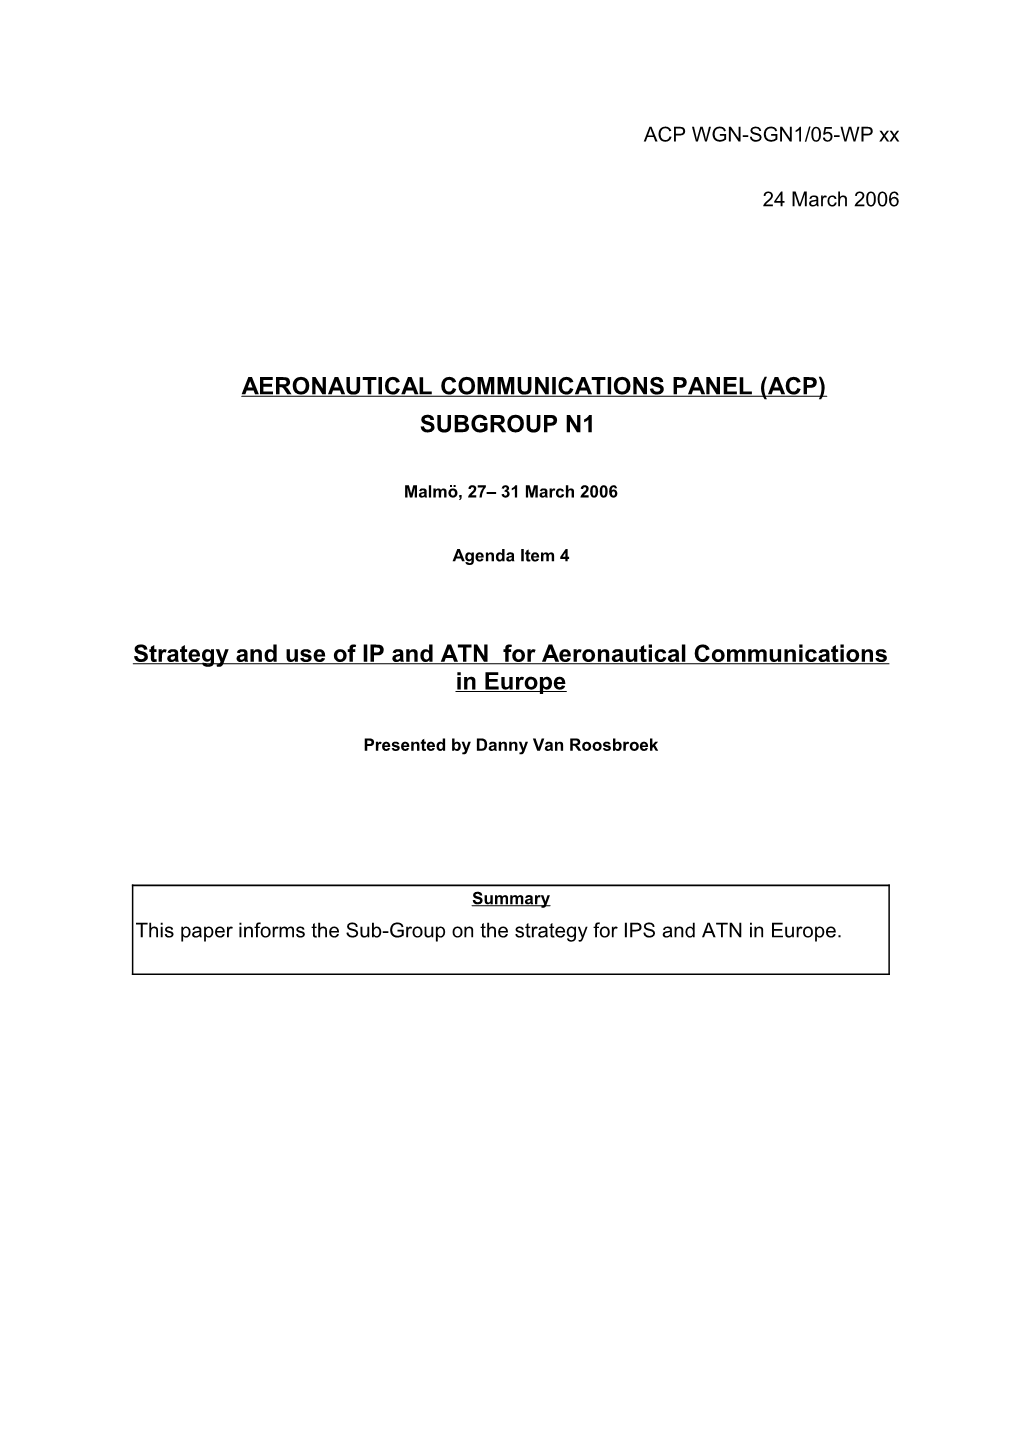 Strategy and Use of IP and ATN for Aeronautical Communications in Europe